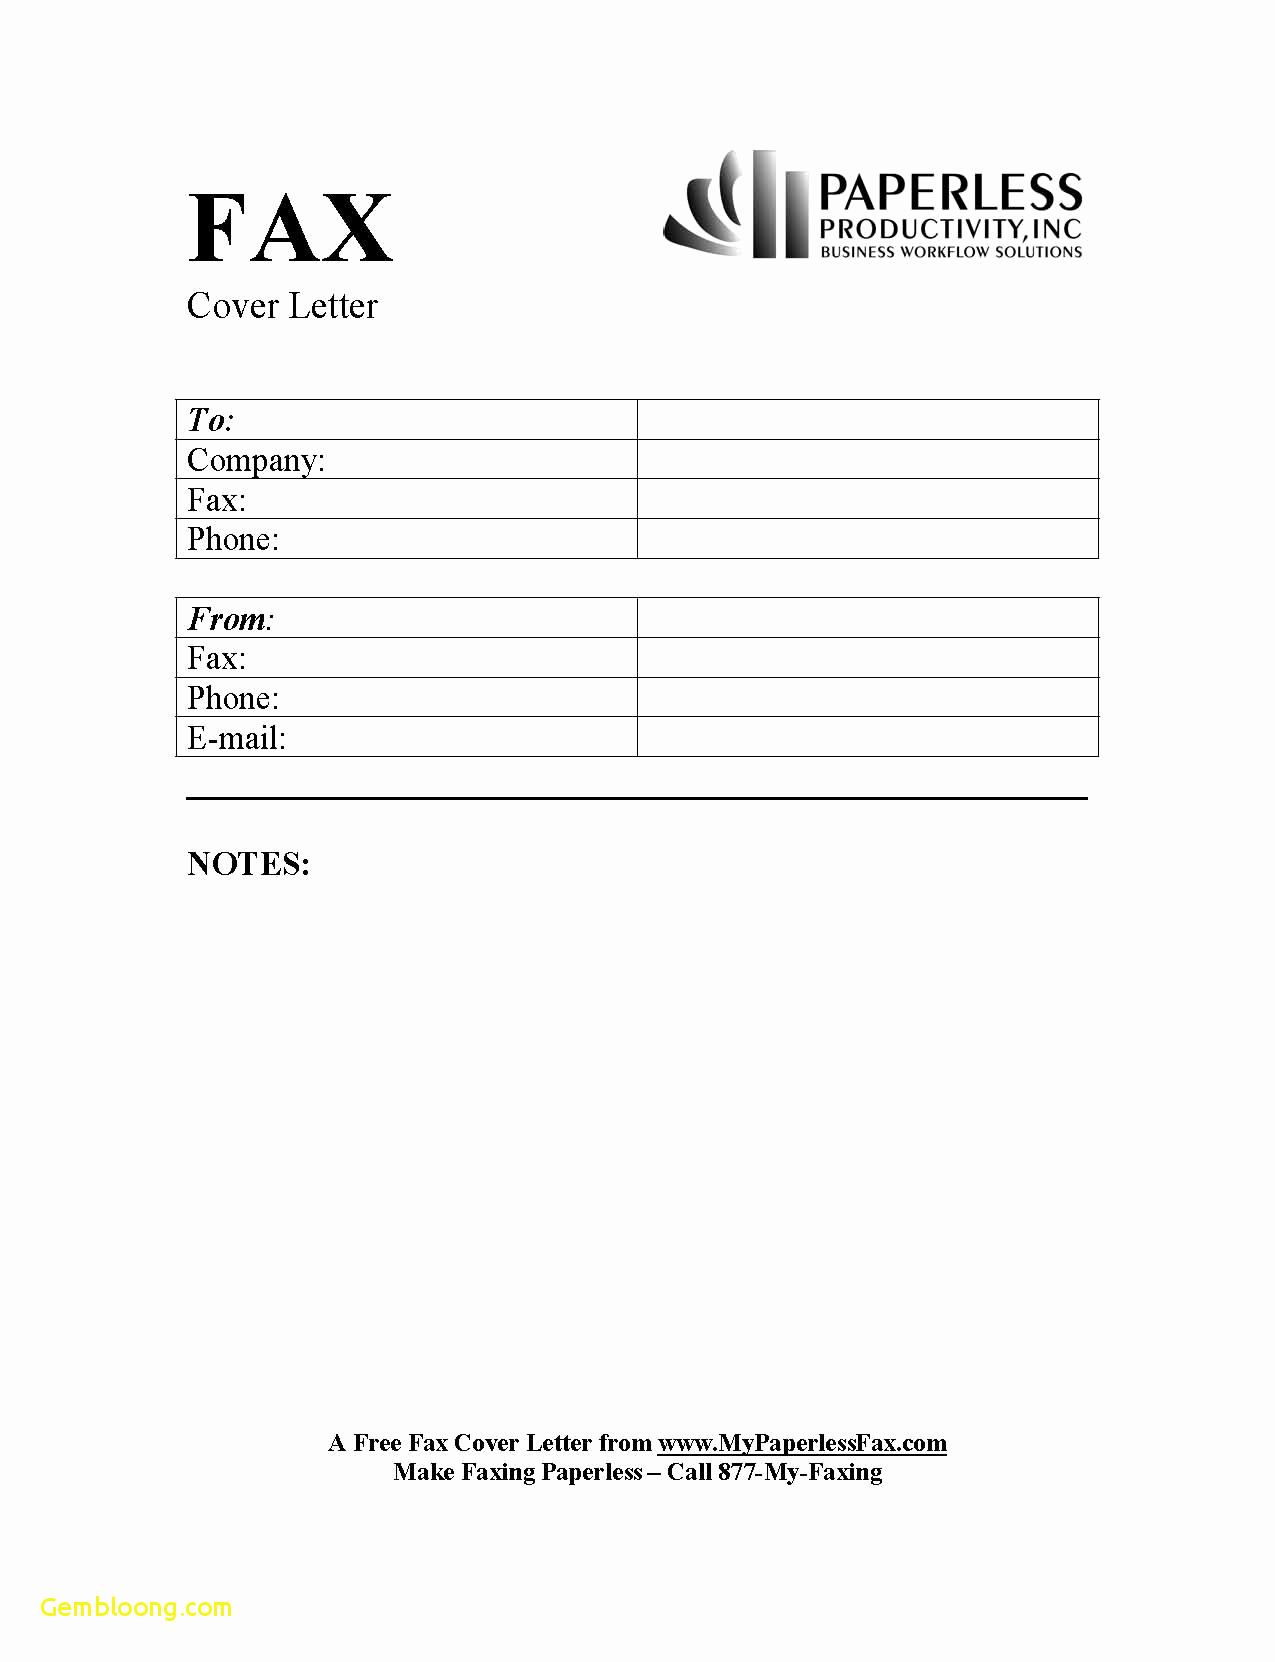 Free Fax Cover Letter Template Word - Fax Cover Sheet Example